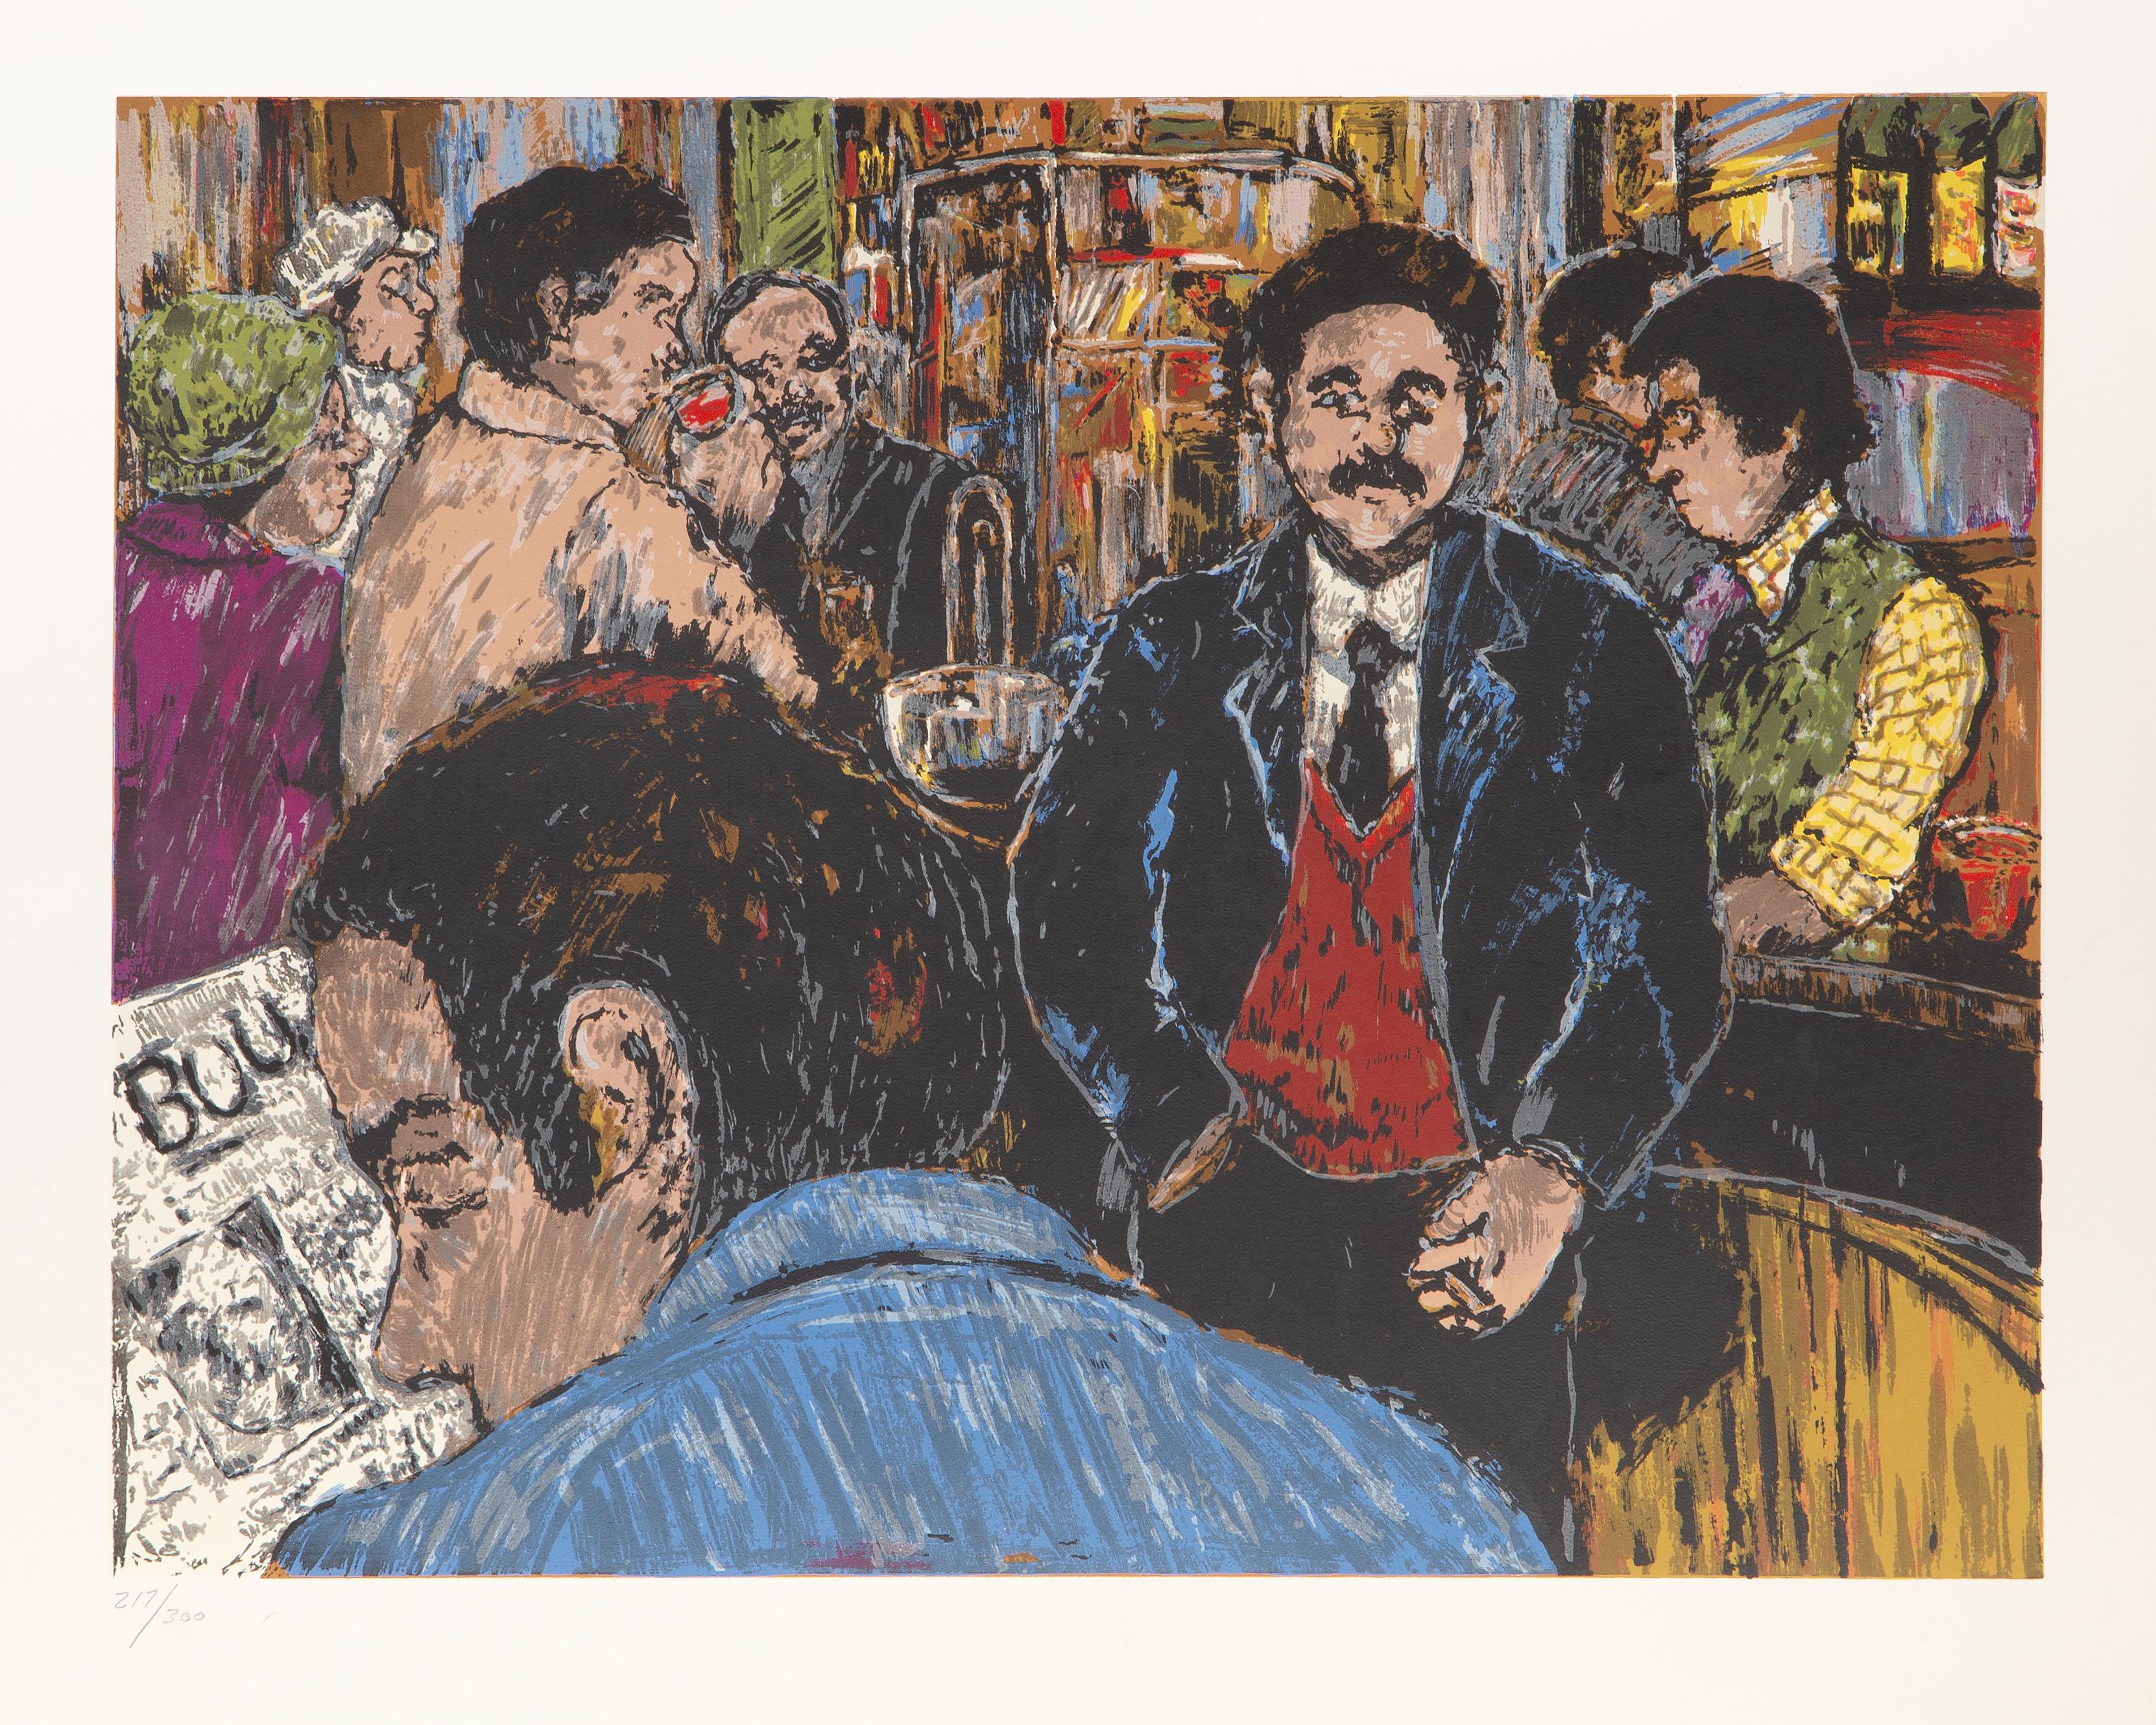 Bar Scene
David Azuz, Israeli/French (1942–2014)
Date: circa 1980
Lithograph, numbered in pencil
Edition of 217/300
Image Size: 19.75 x 25.5 inches
Size: 26 x 32.5 in. (66.04 x 82.55 cm)